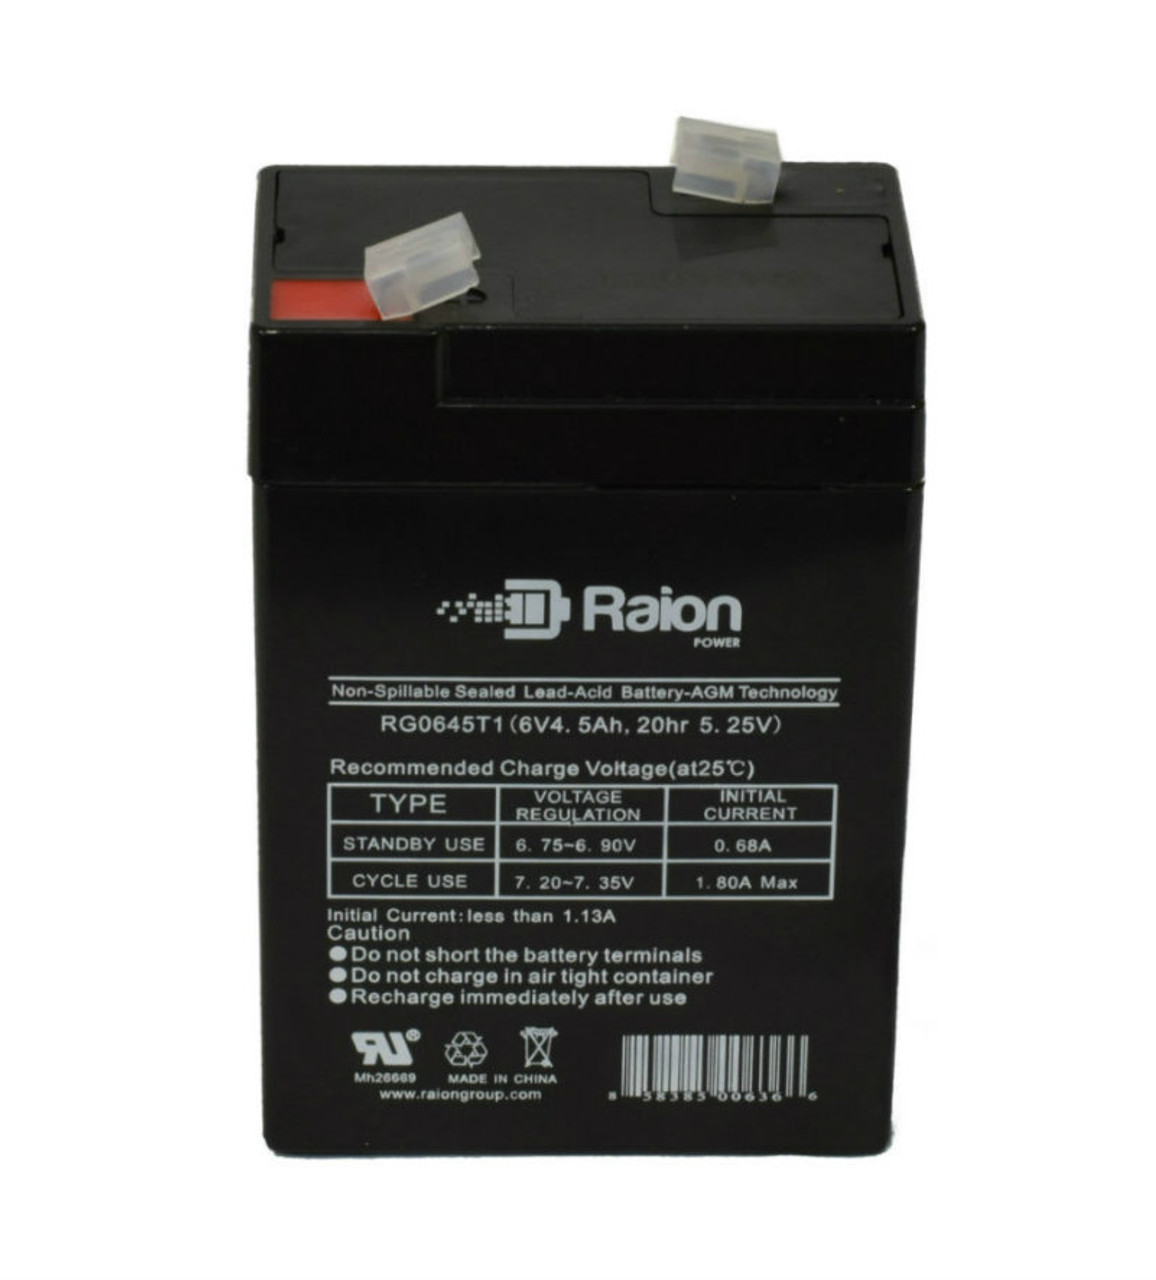 Raion Power RG0645T1 Replacement Battery Cartridge for Trio Lighting TL930007